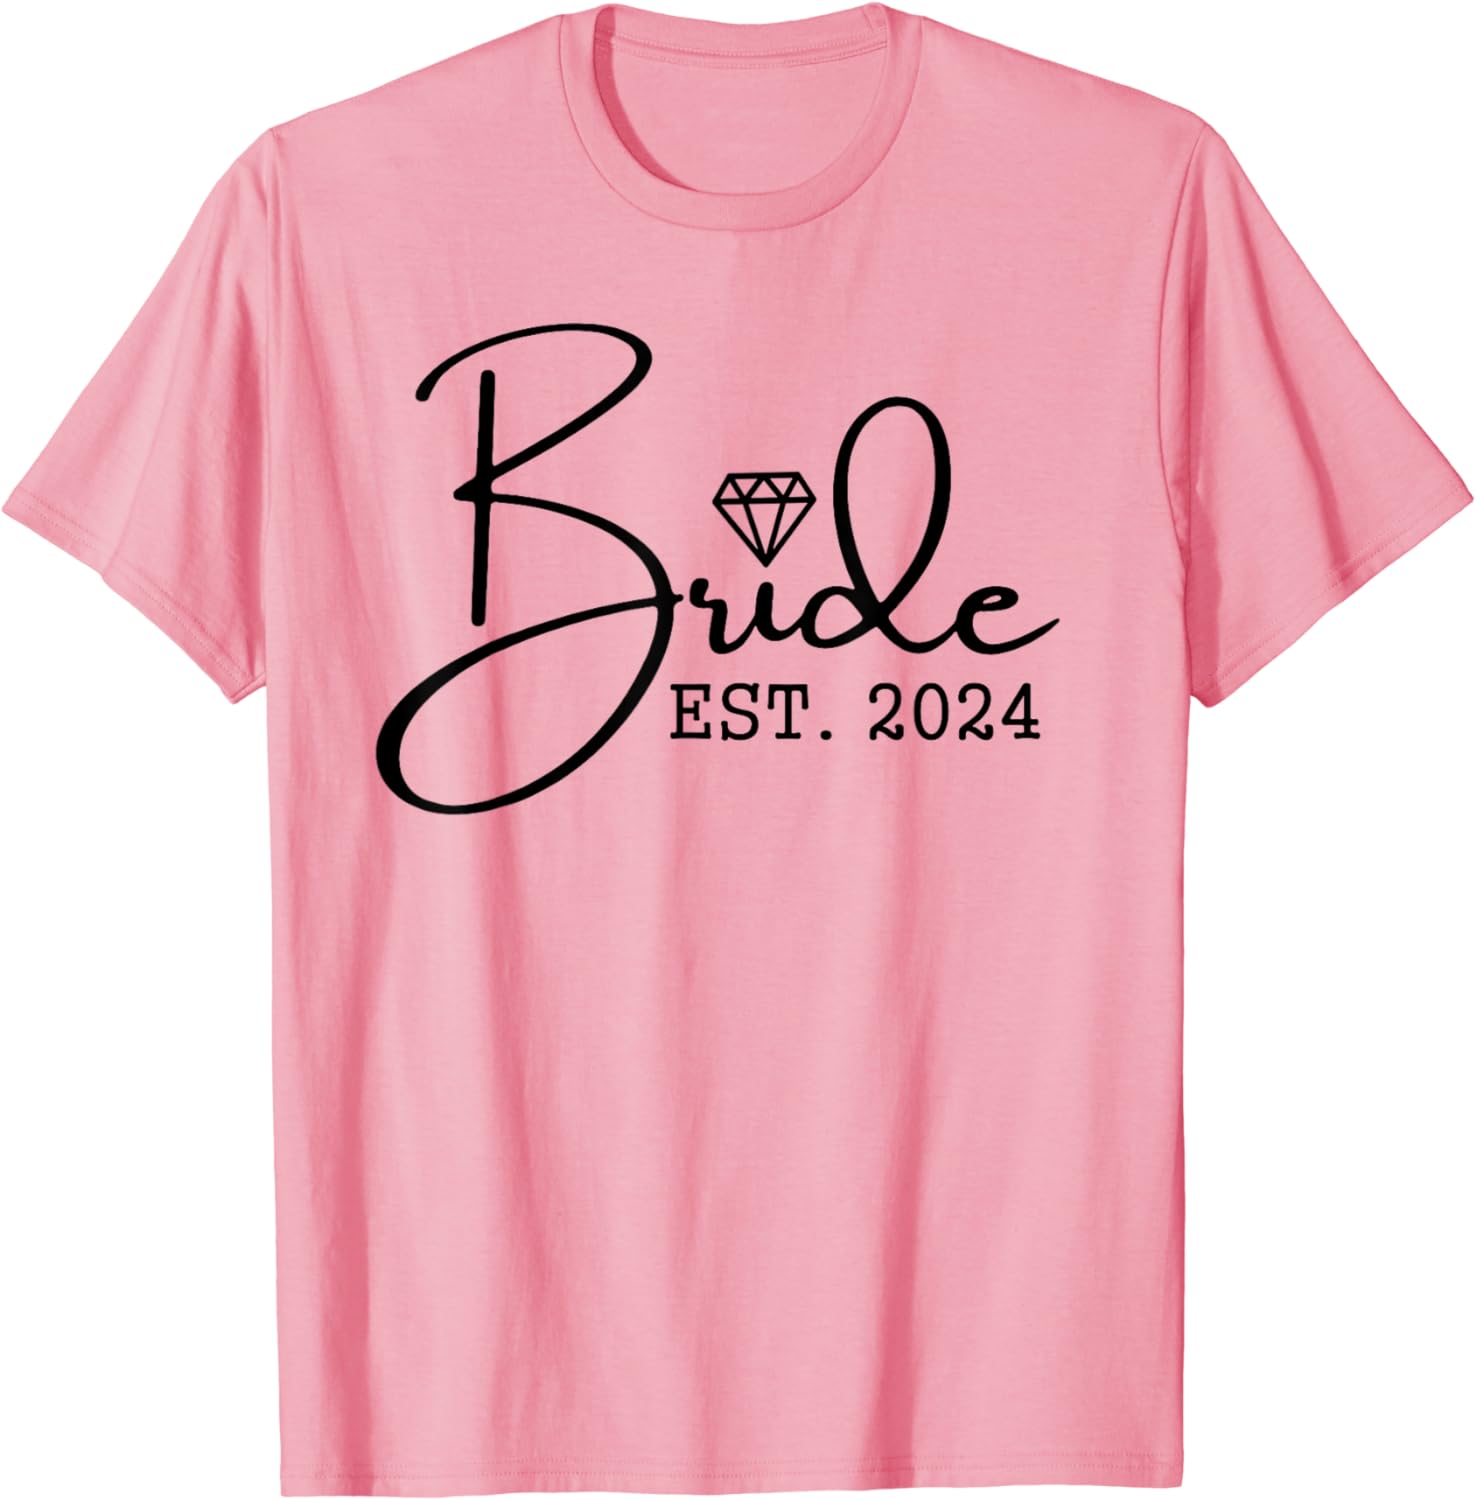 A pink t-shirt with black text Description automatically generated